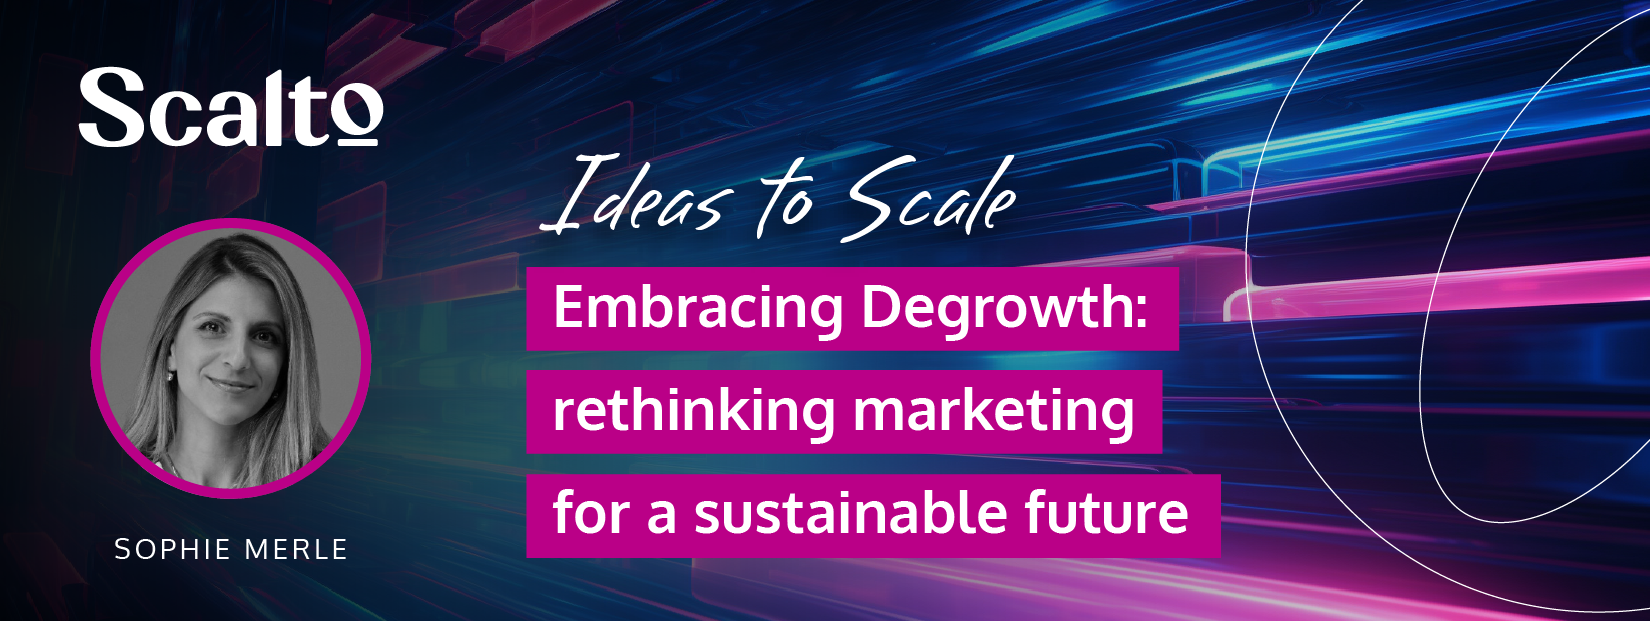 Scalto_Embracing Degrowth_Banner-2_20240412 (1)